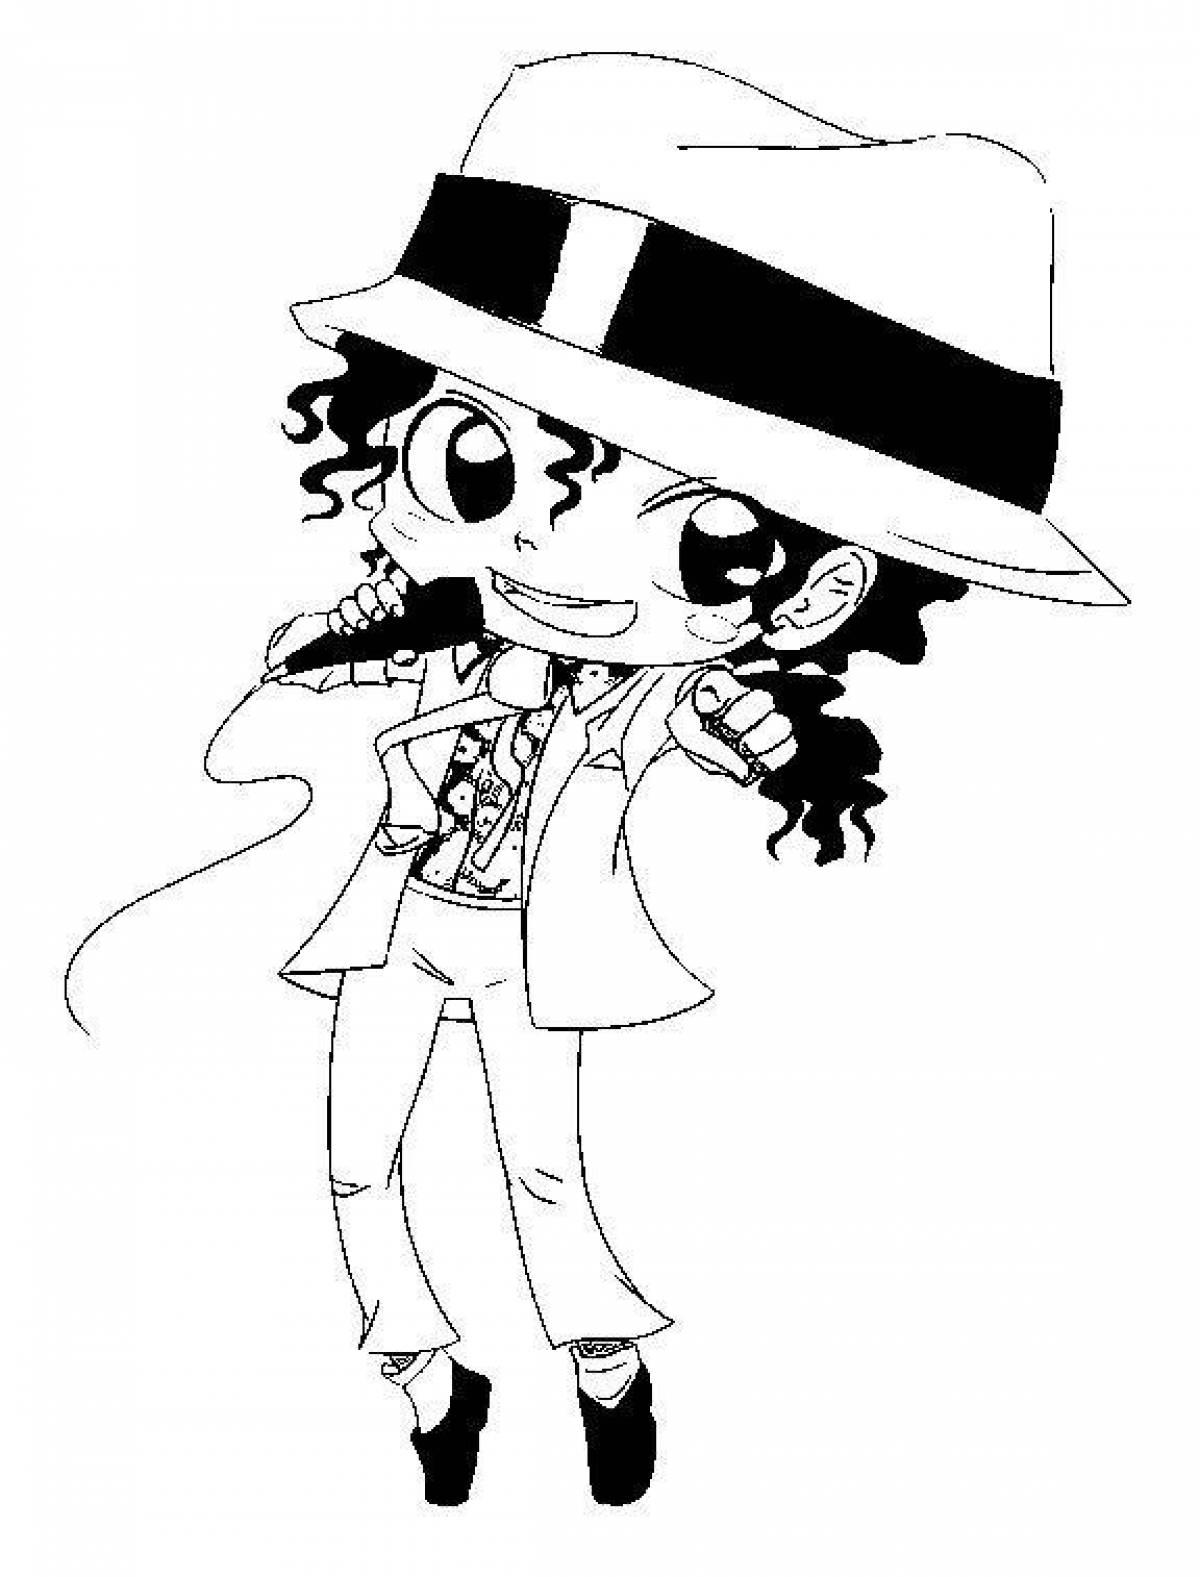 Michael Jackson's perfect coloring book